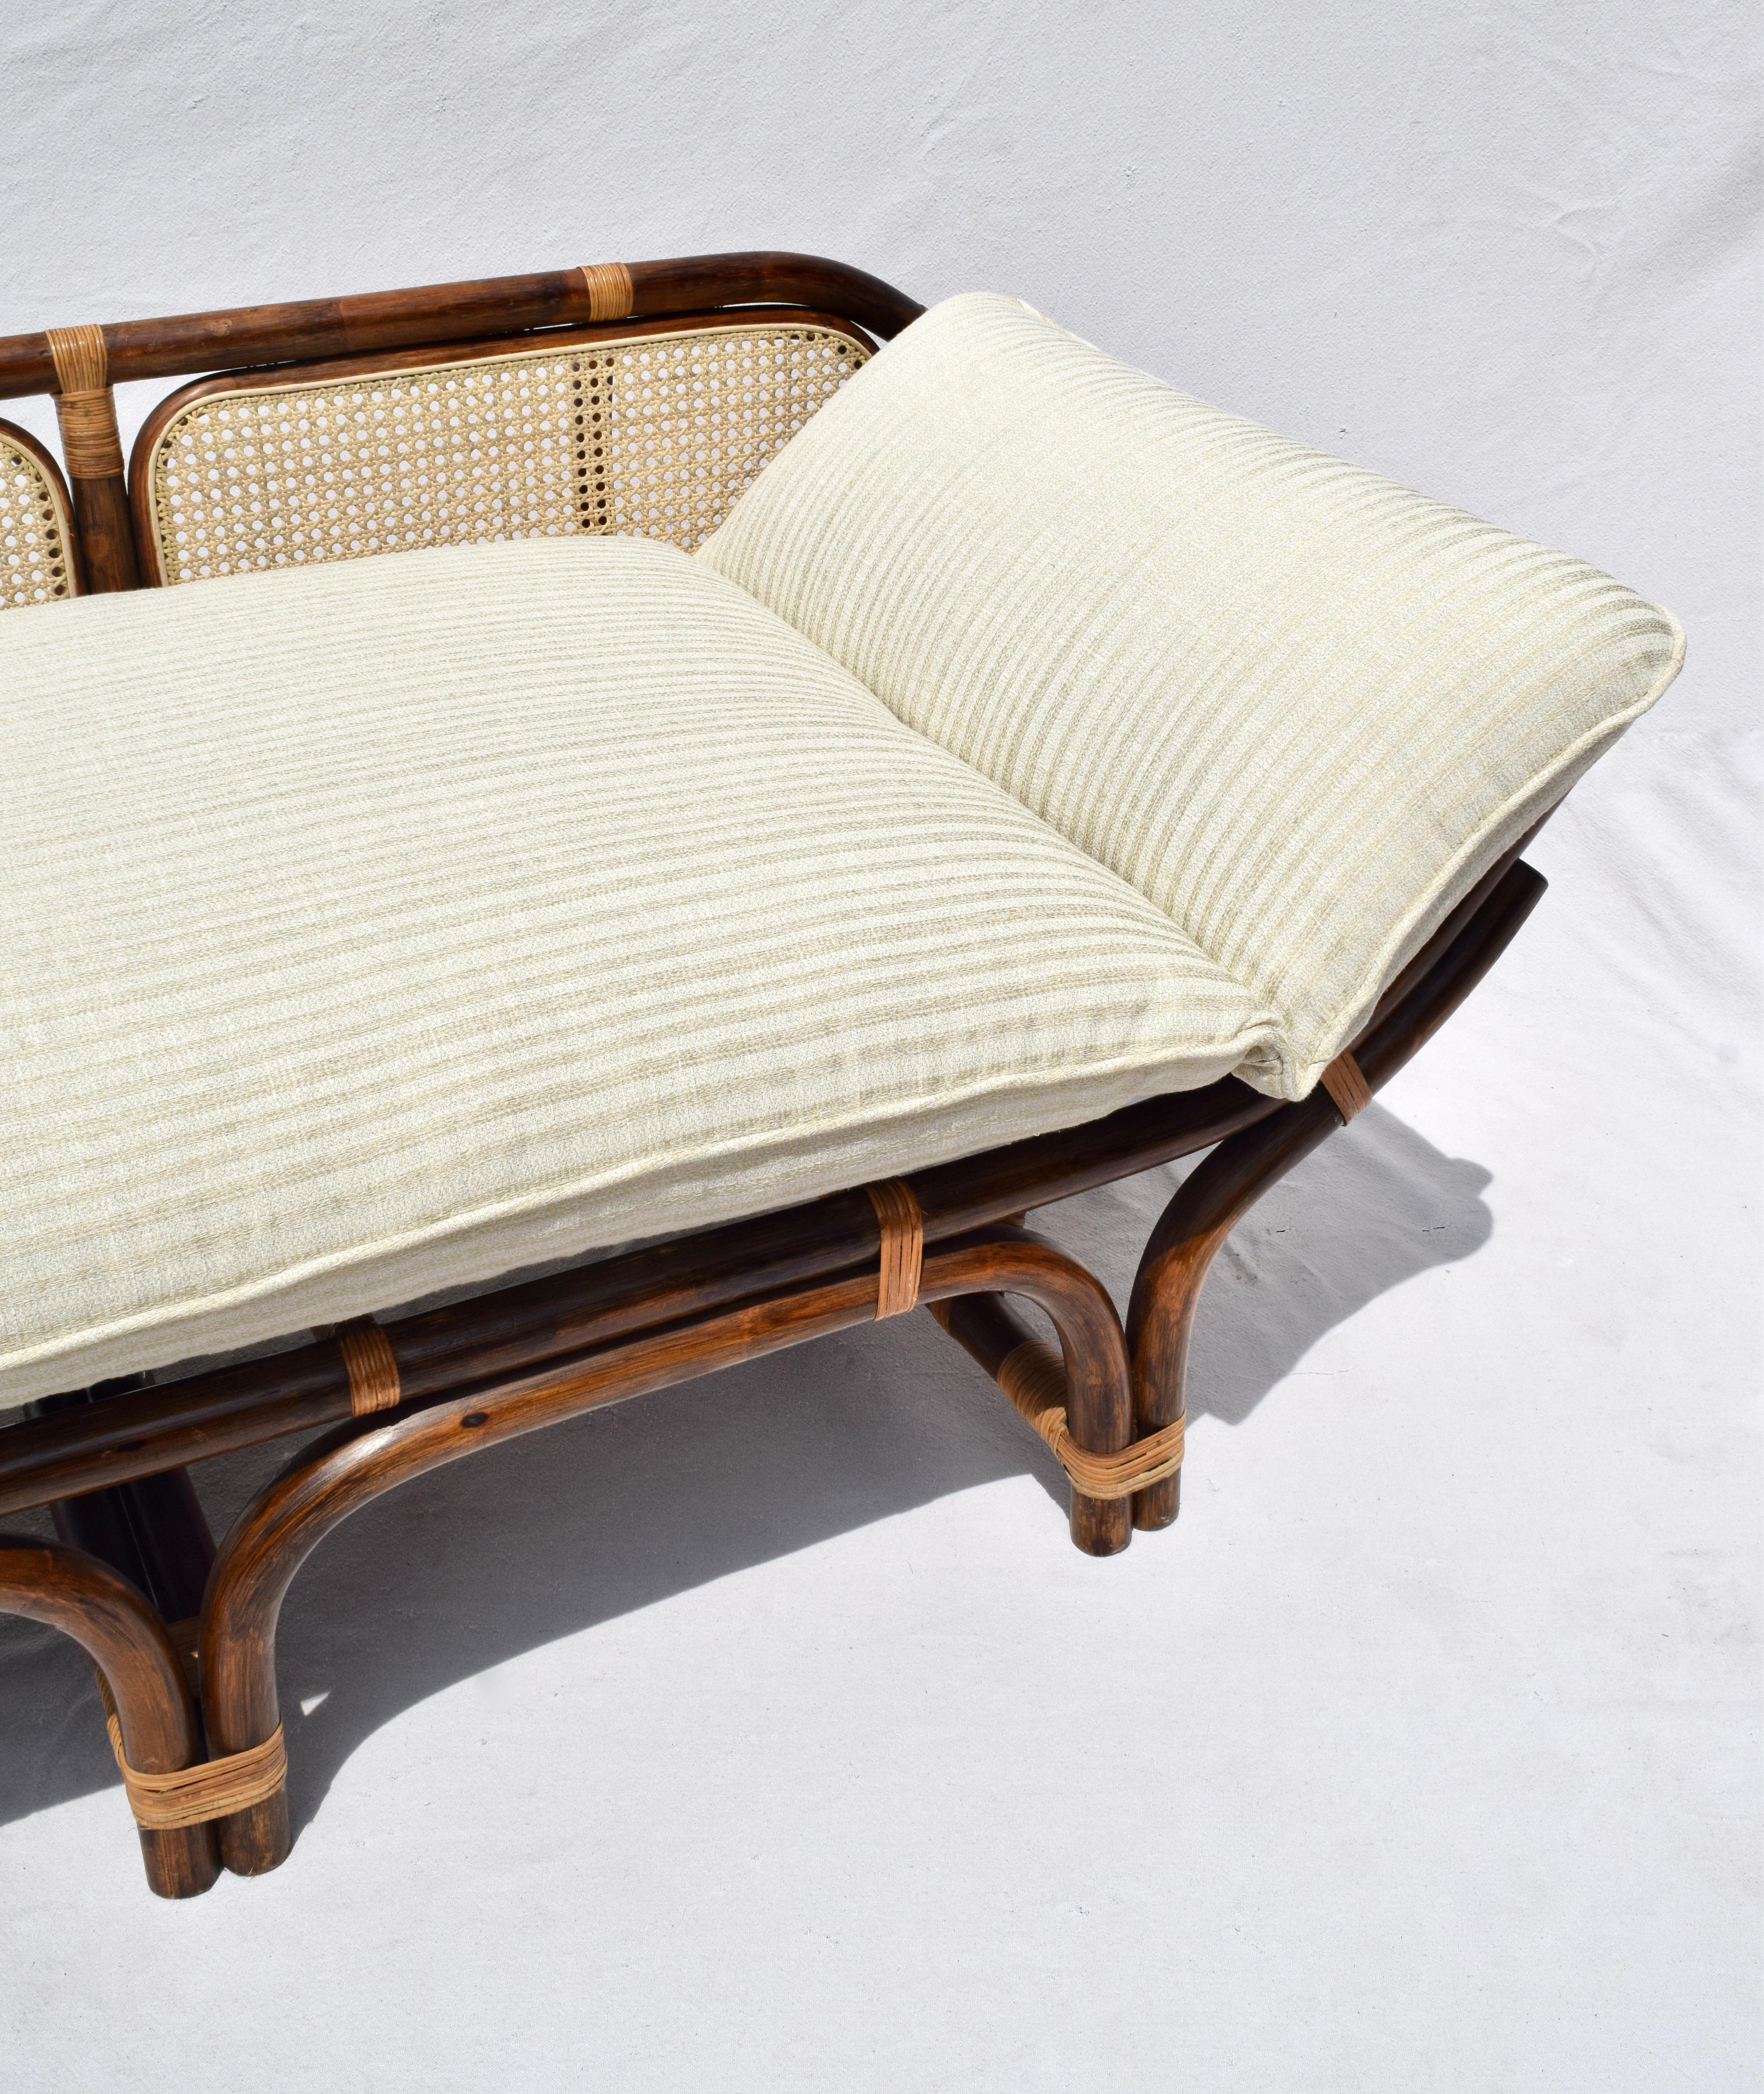 1980's, Bamboo Rattan Caned Daybed Chaise Lounge 1